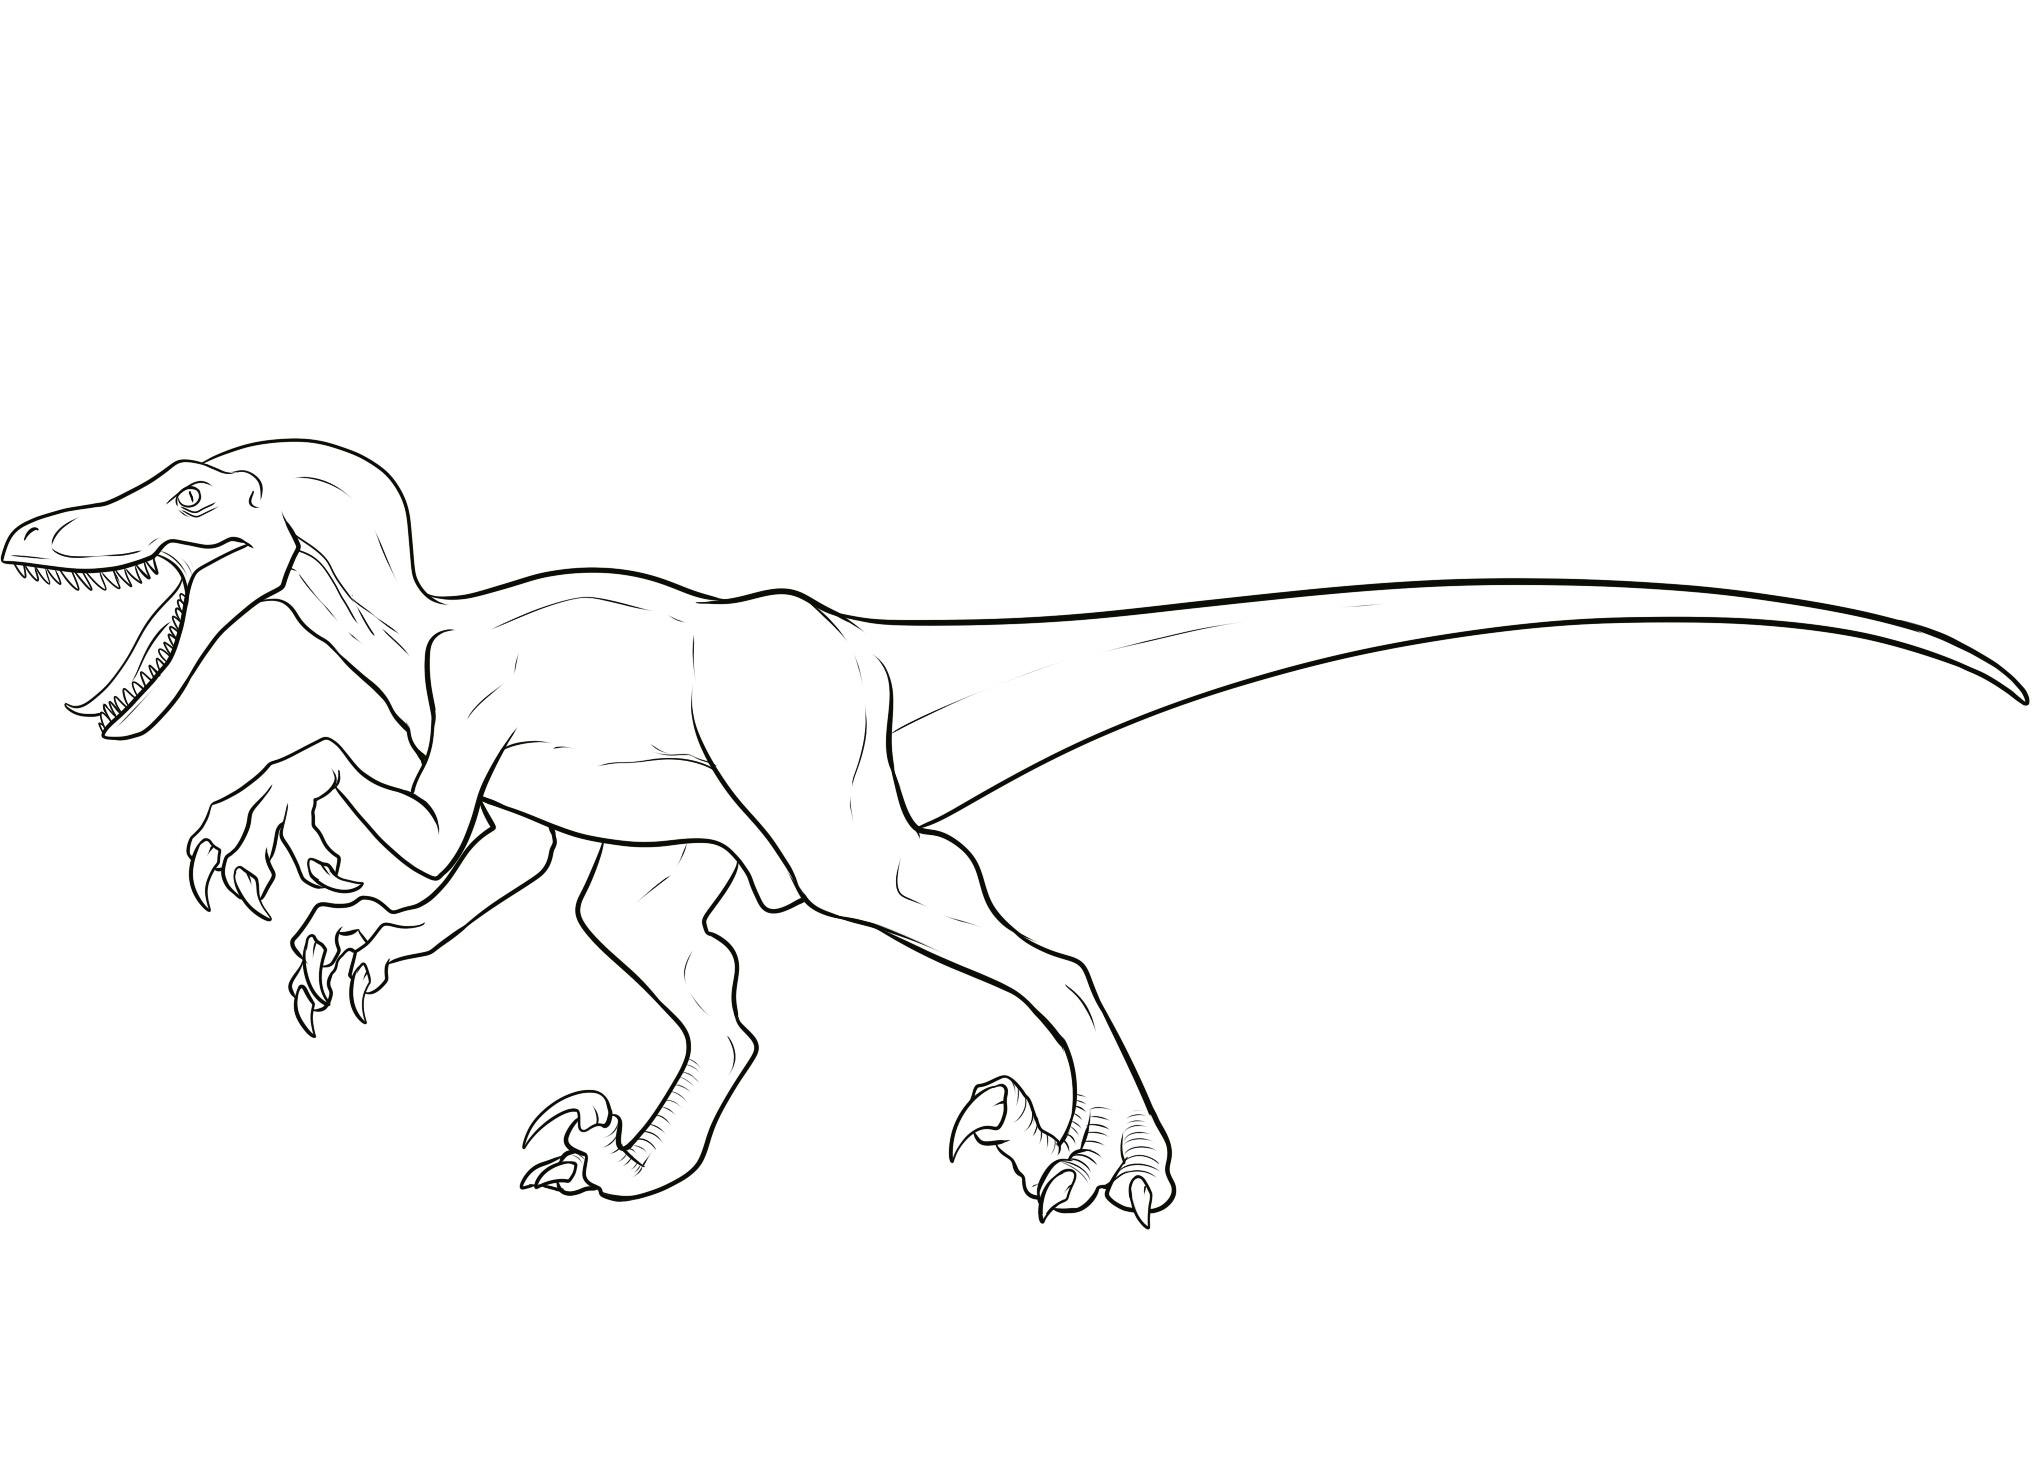 Velociraptor Coloring Pages Best Coloring Pages For Kids Coloring Wallpapers Download Free Images Wallpaper [coloring654.blogspot.com]